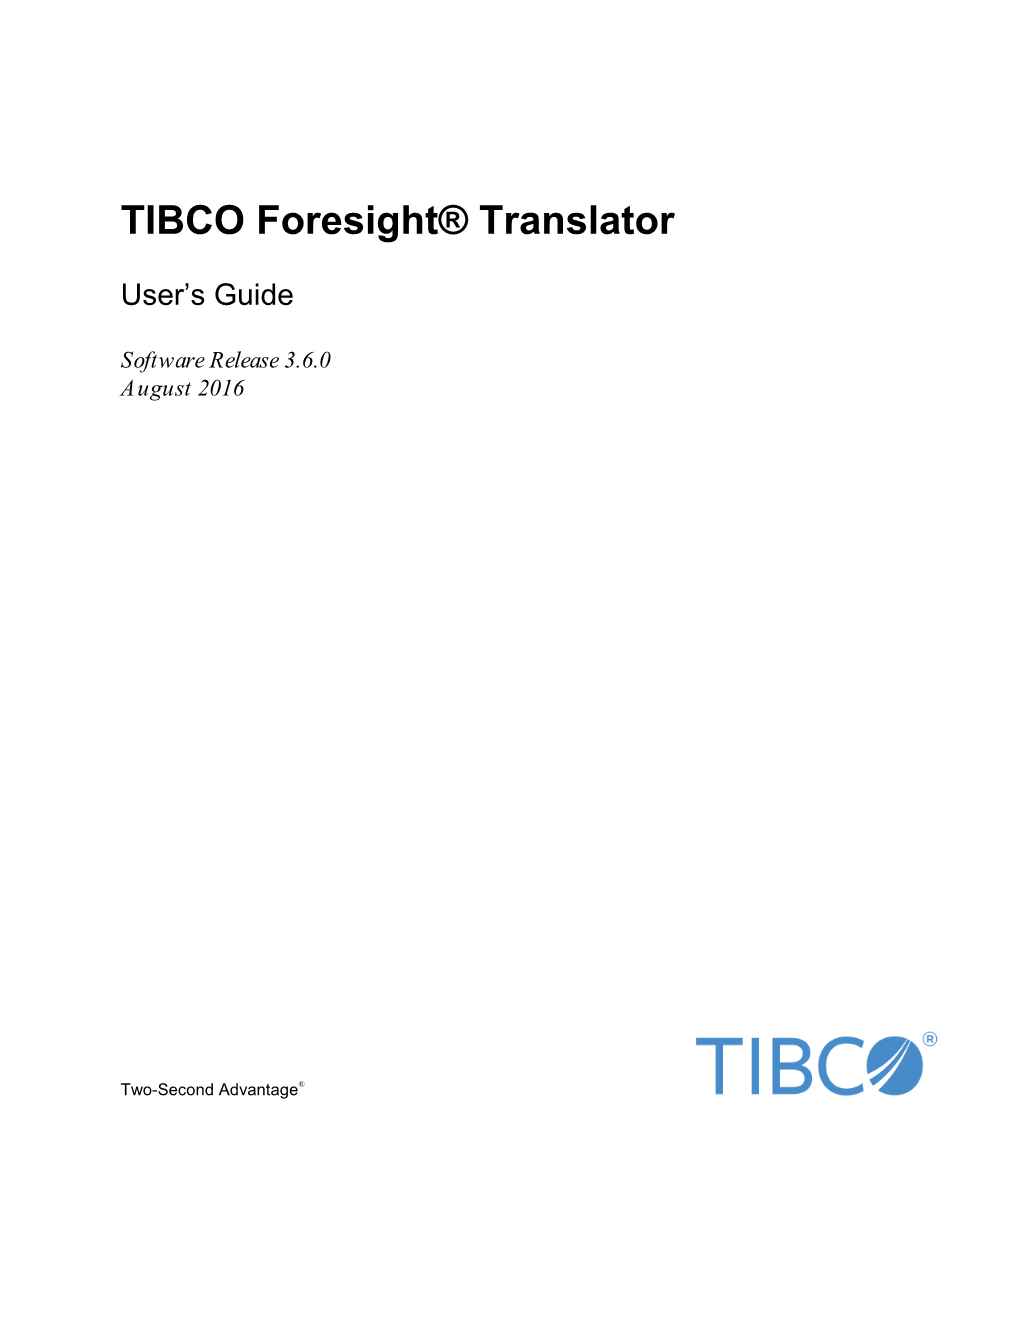 TIBCO Foresight® Translator User's Guide Introduction  1